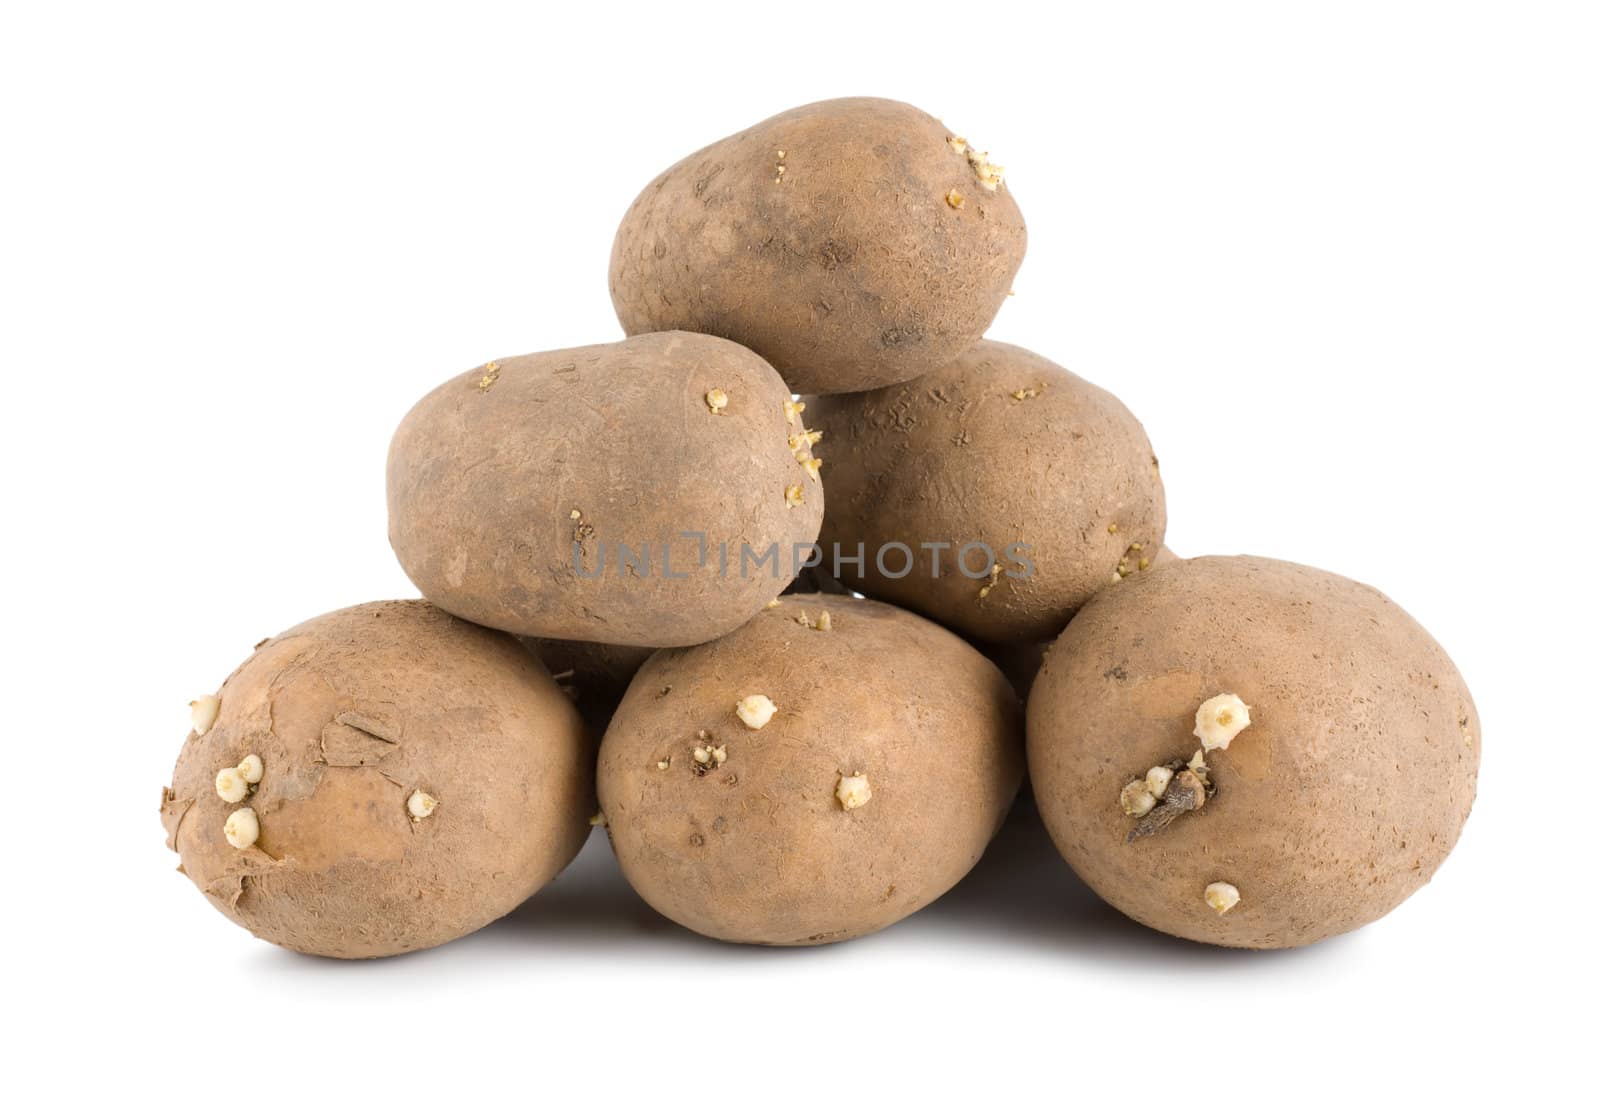 Old potatoes by Givaga